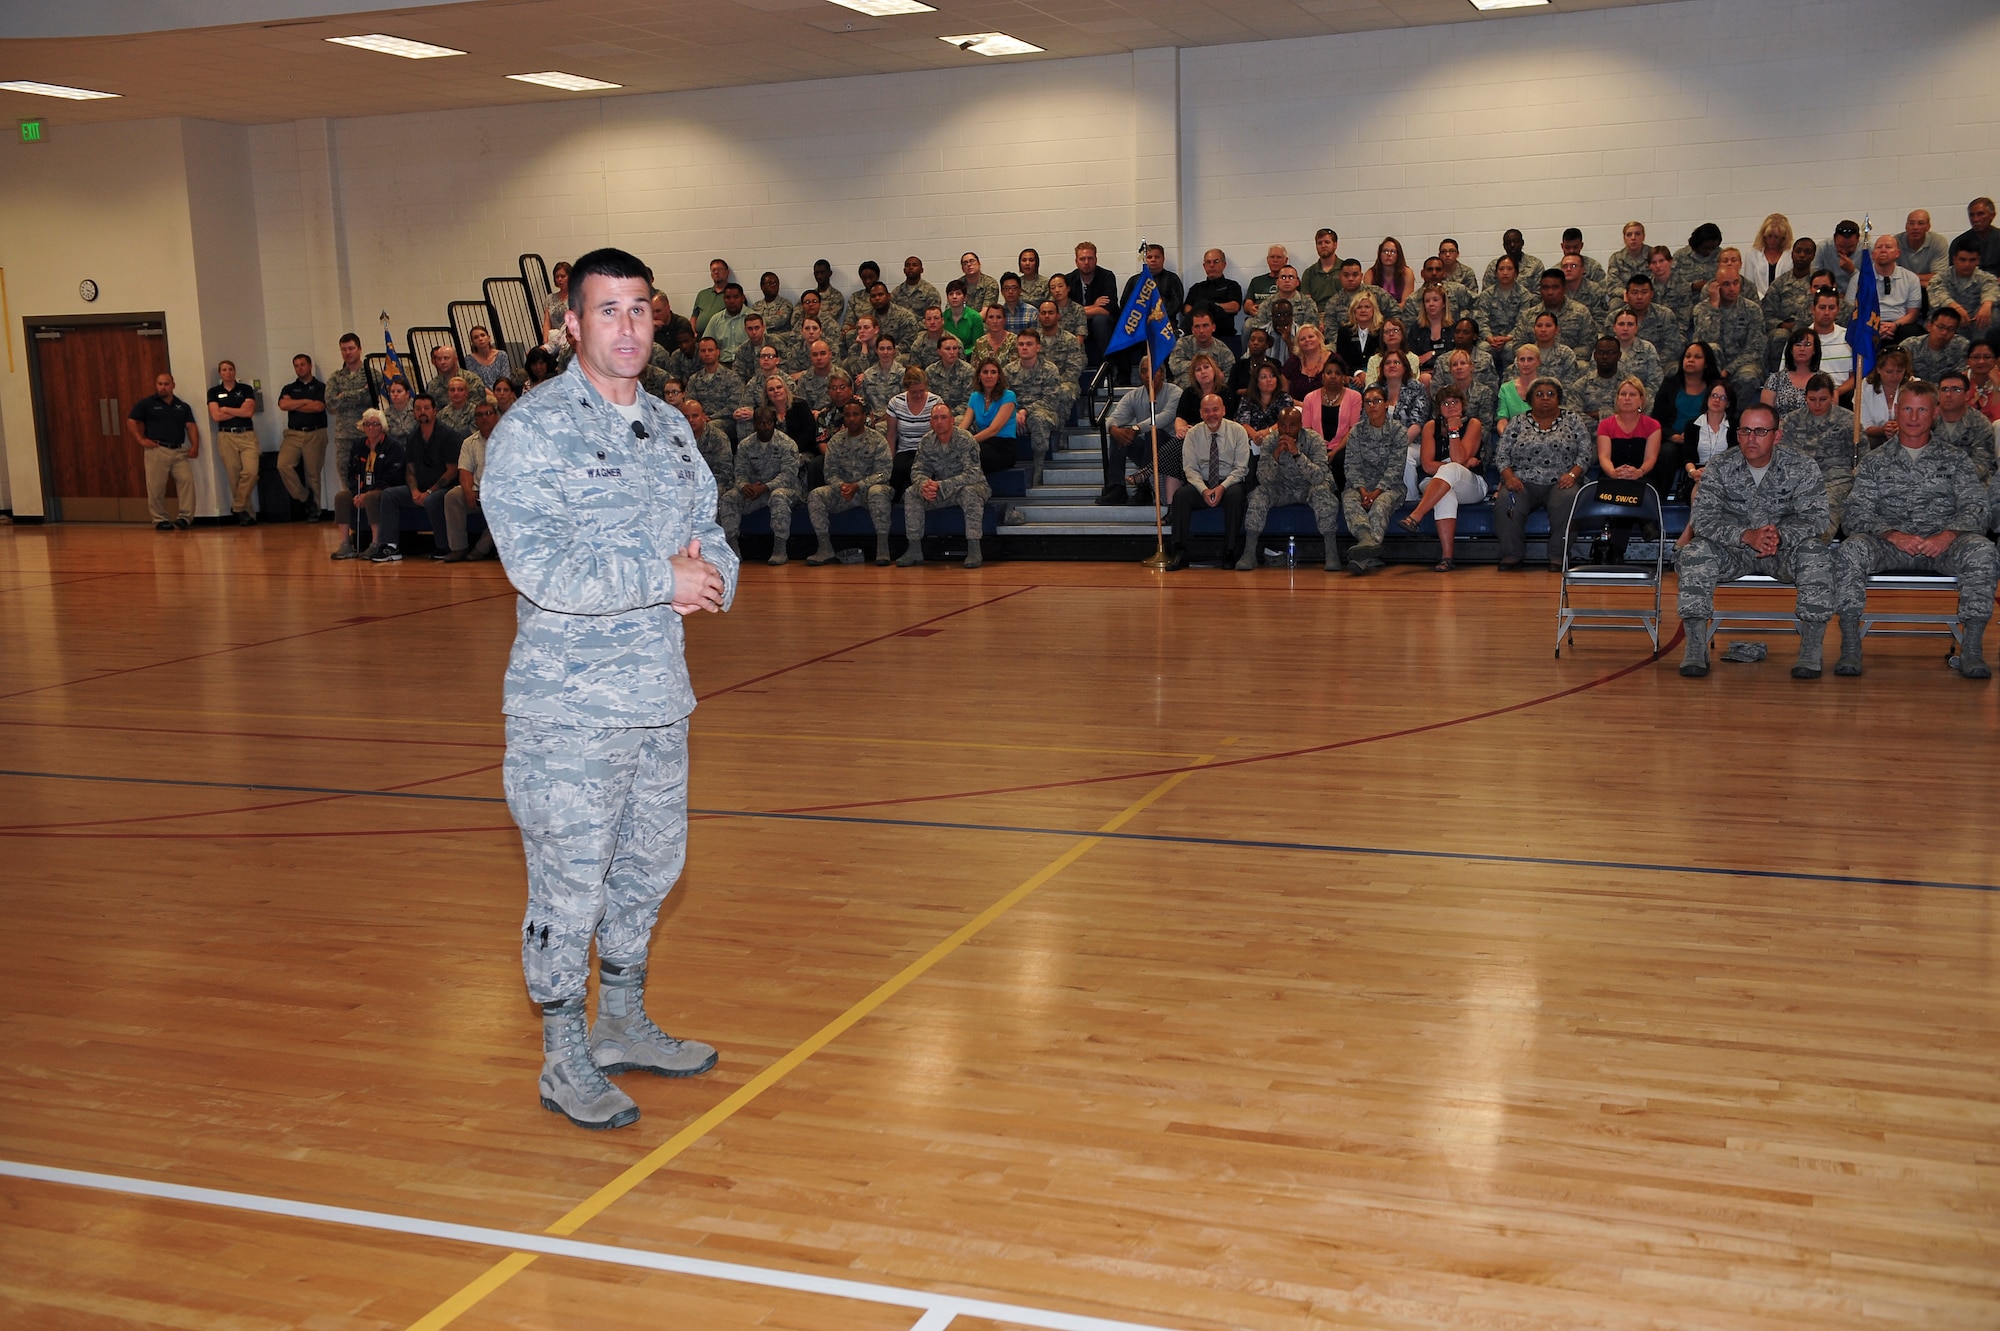 Col. John Wagner, 460th Space Wing commander, left, speaks to the men and women of Team Buckley where he presented his expectations and goals for his coming term June 18, 2014, at the fitness center on Buckley Air Force Base, Colo. Wagner assumed command of the 460th SW after serving in several space-based positions across the Air Force. (U.S. Air Force photo by Senior Airman Phillip Houk/Released)